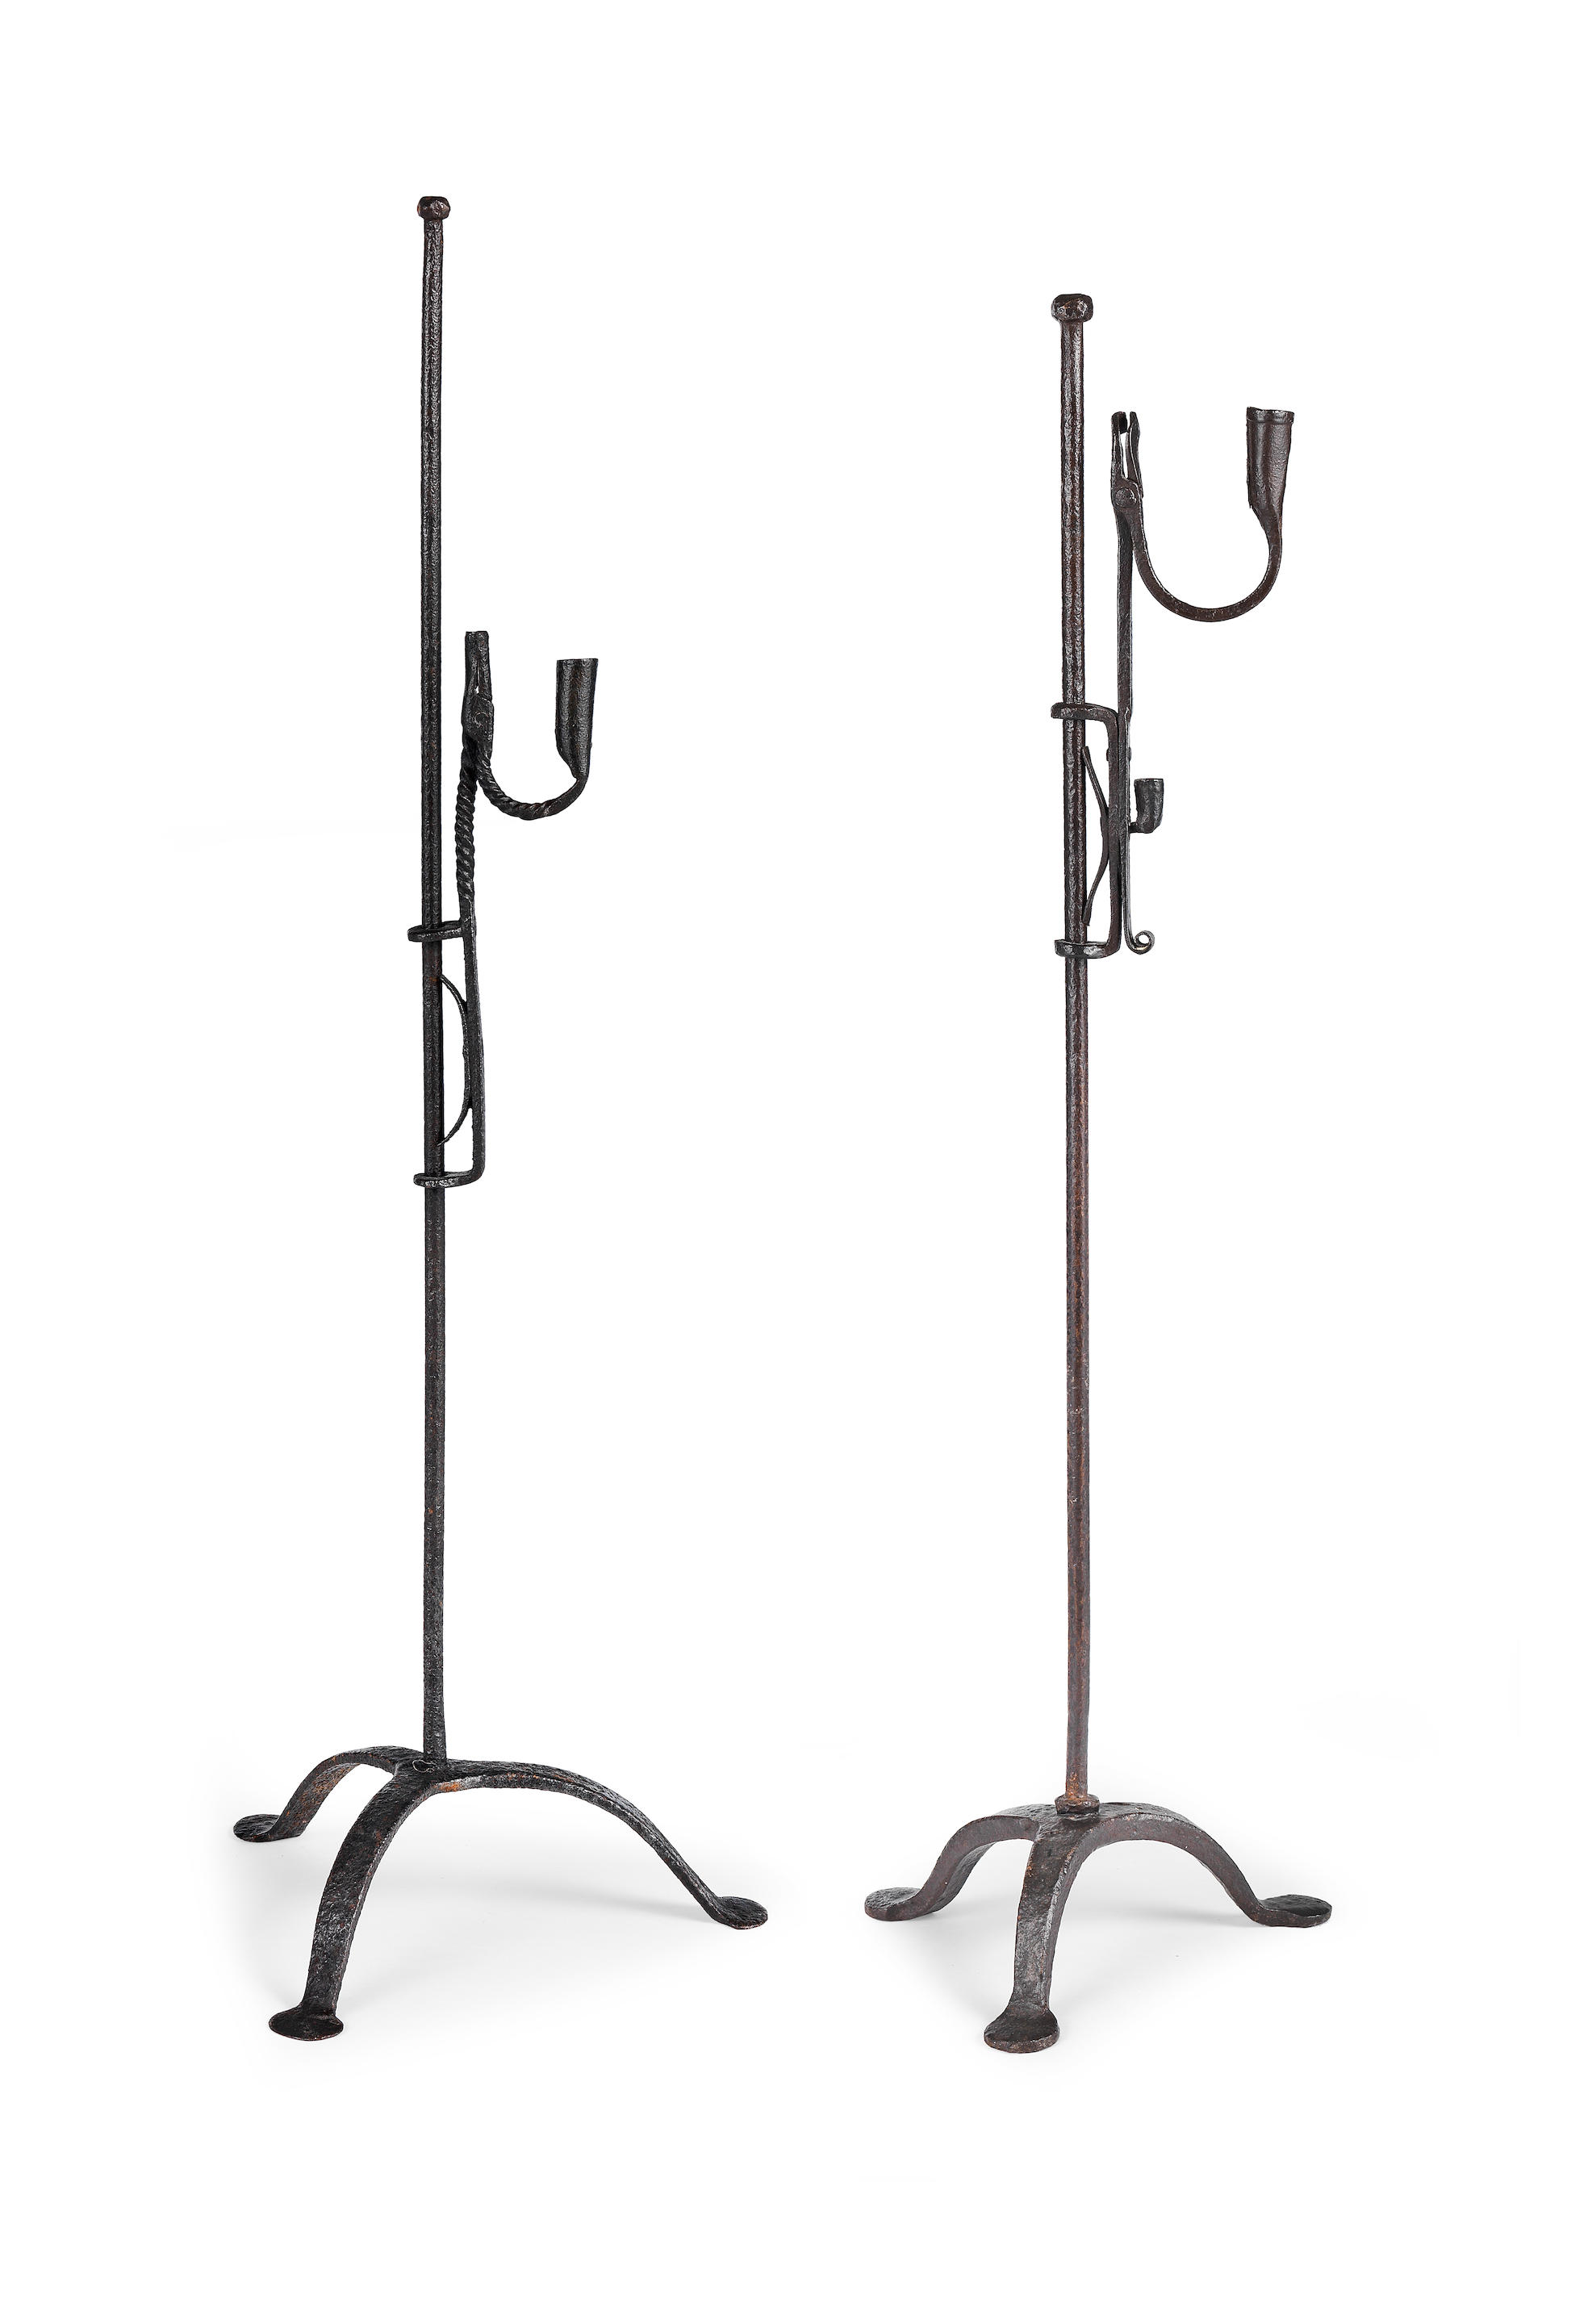 Two wrought iron standing rushlight and candle holders, Irish